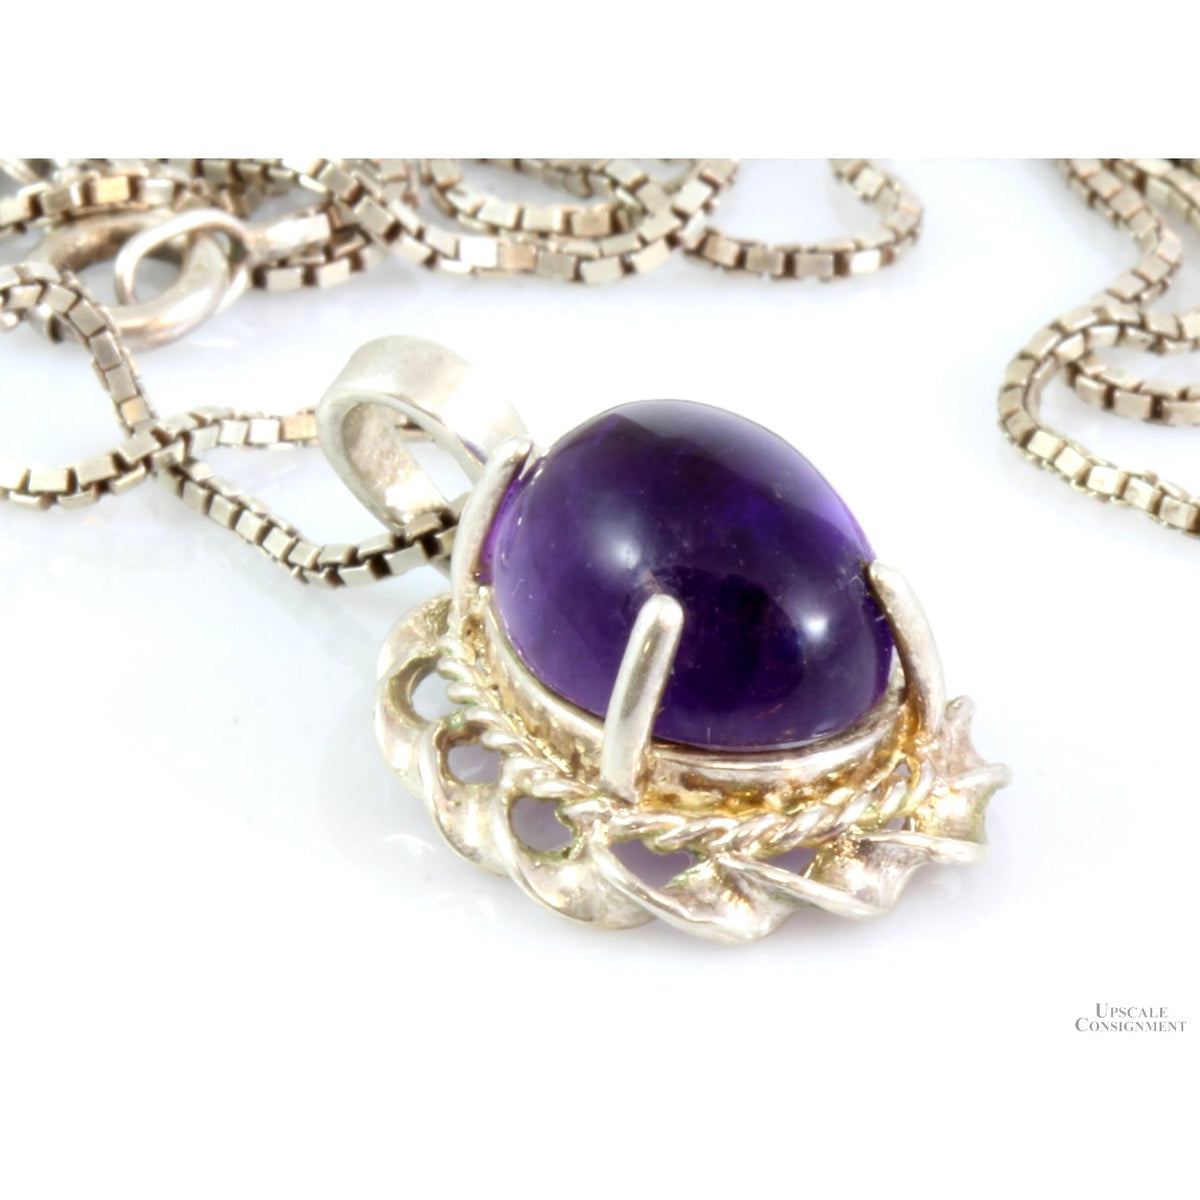 7.73ct Amethyst Sterling Silver Pendant & 24" Chain